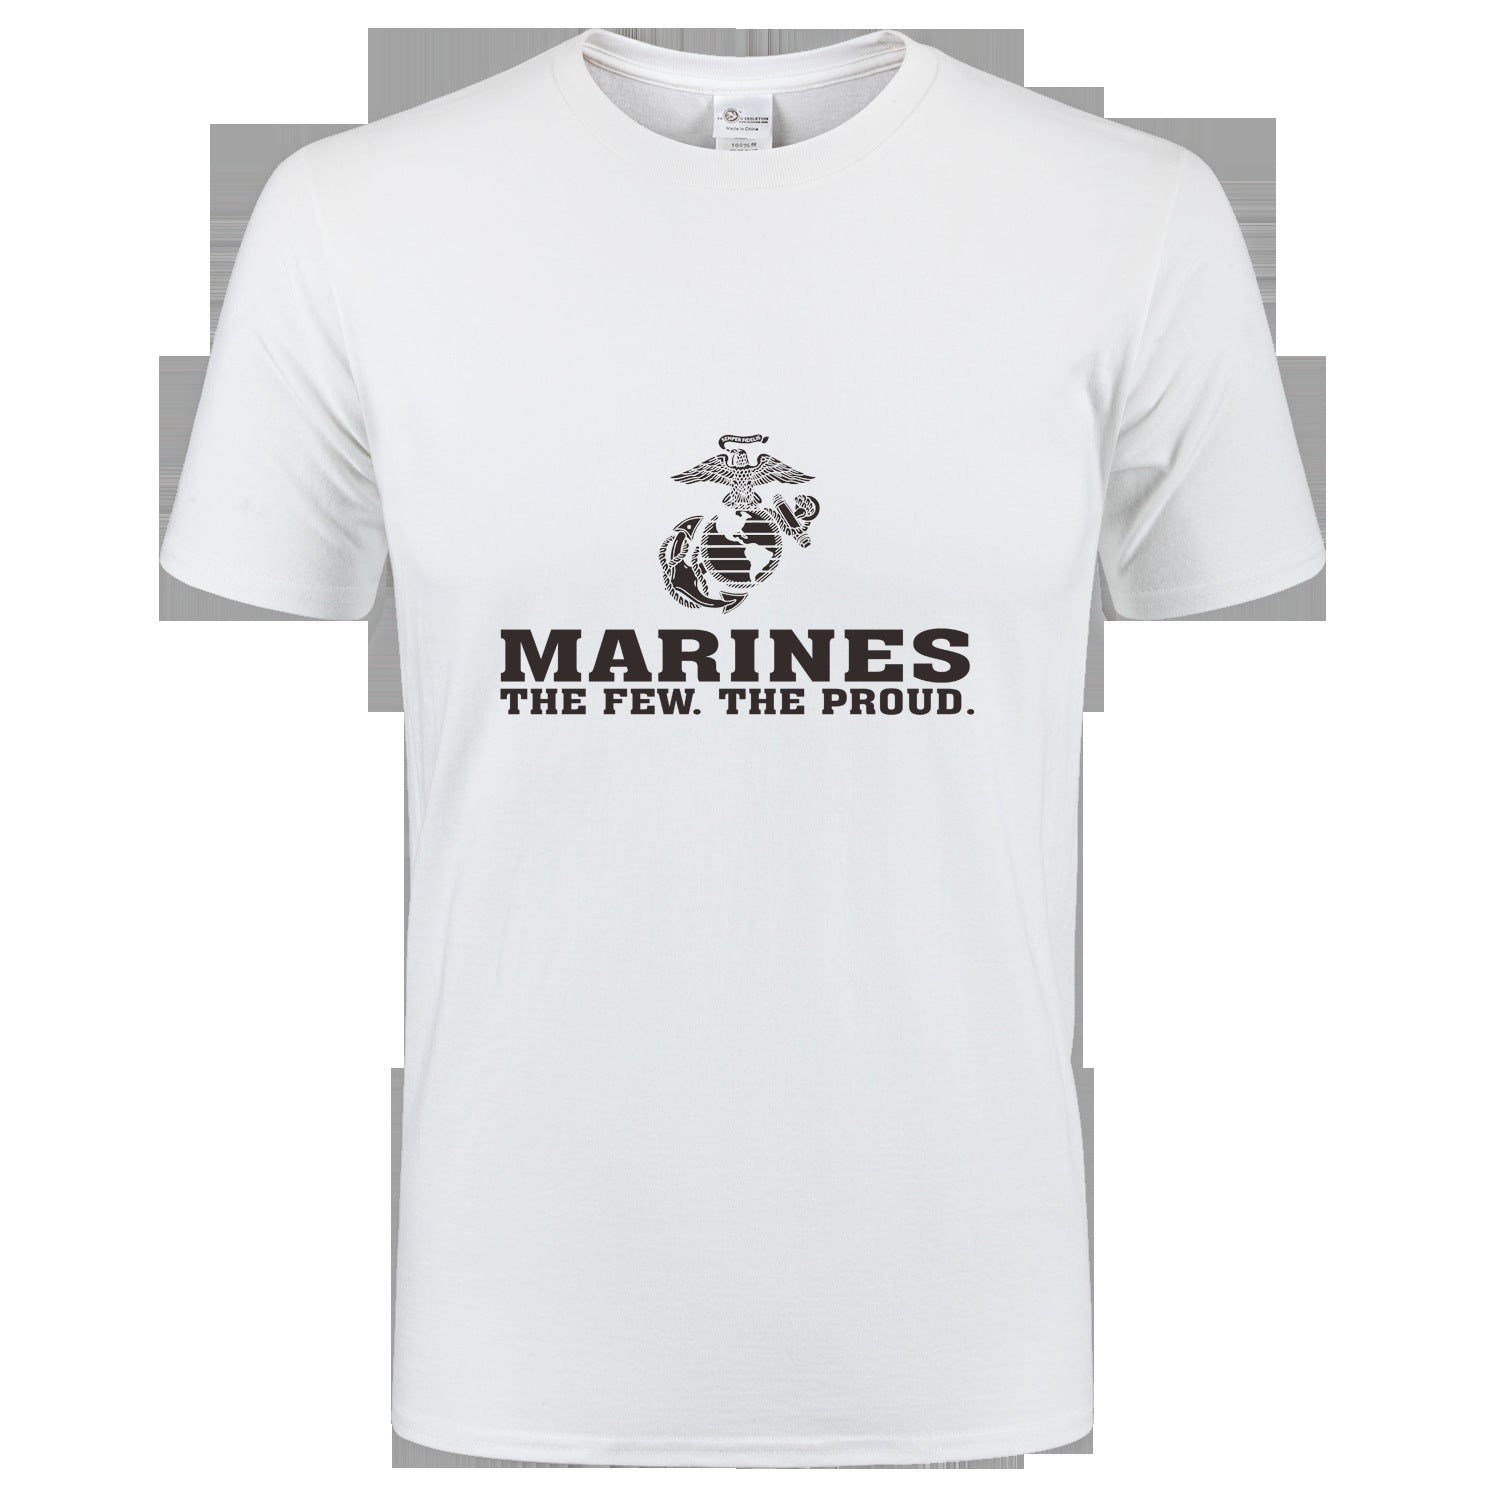 Cotton Tactical T-shirt Printing US Marine Corps Memorial US Army Training Physical Fitness Casual T-shirt